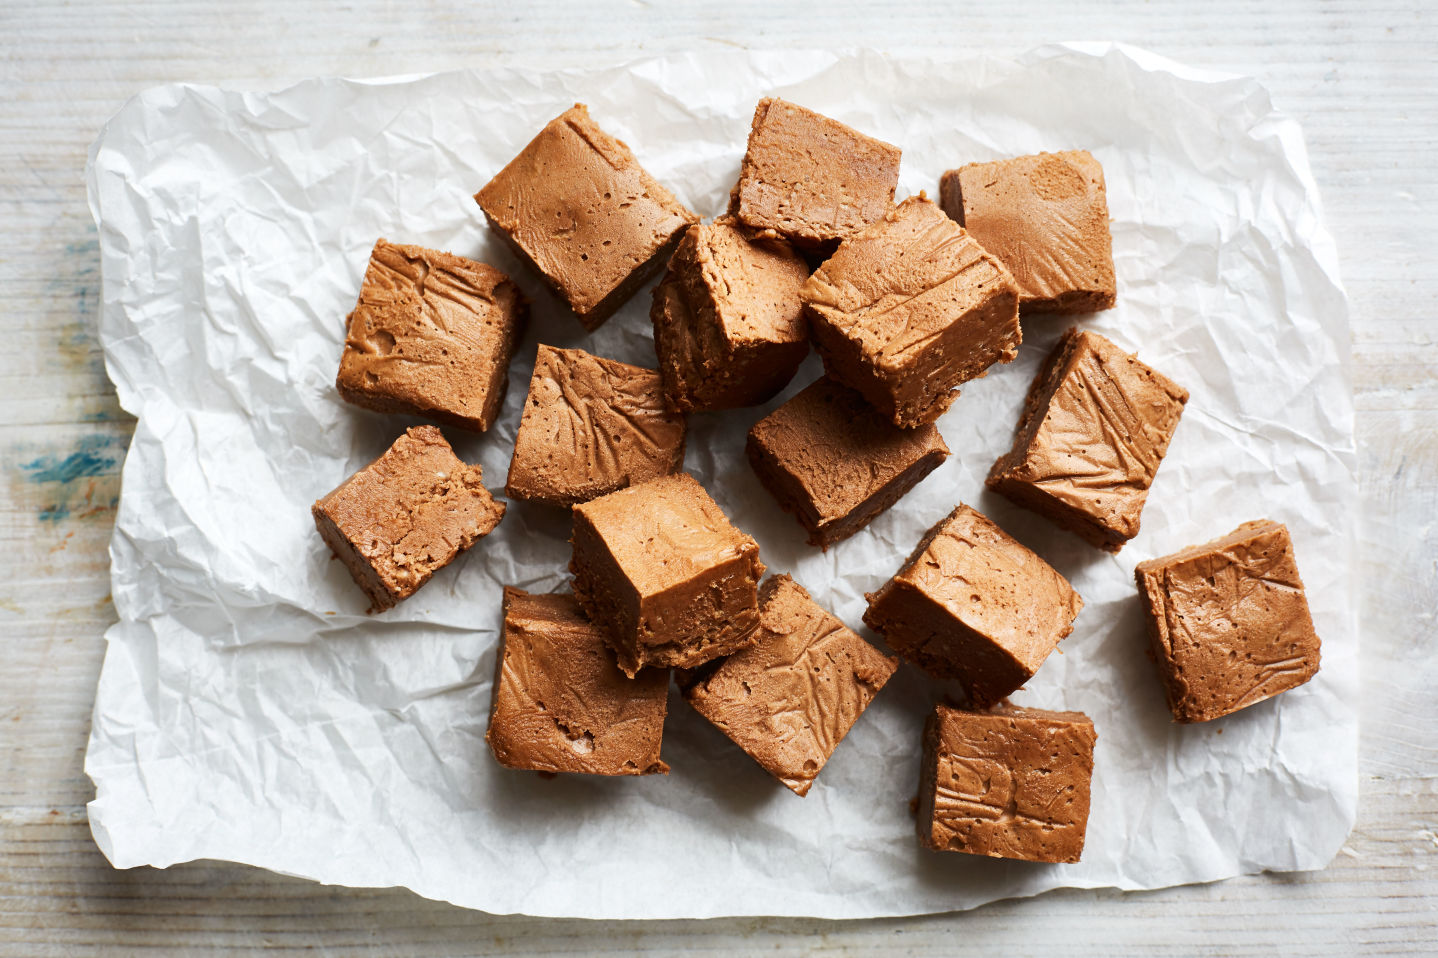 Chocolate and Peanut Butter Fudge